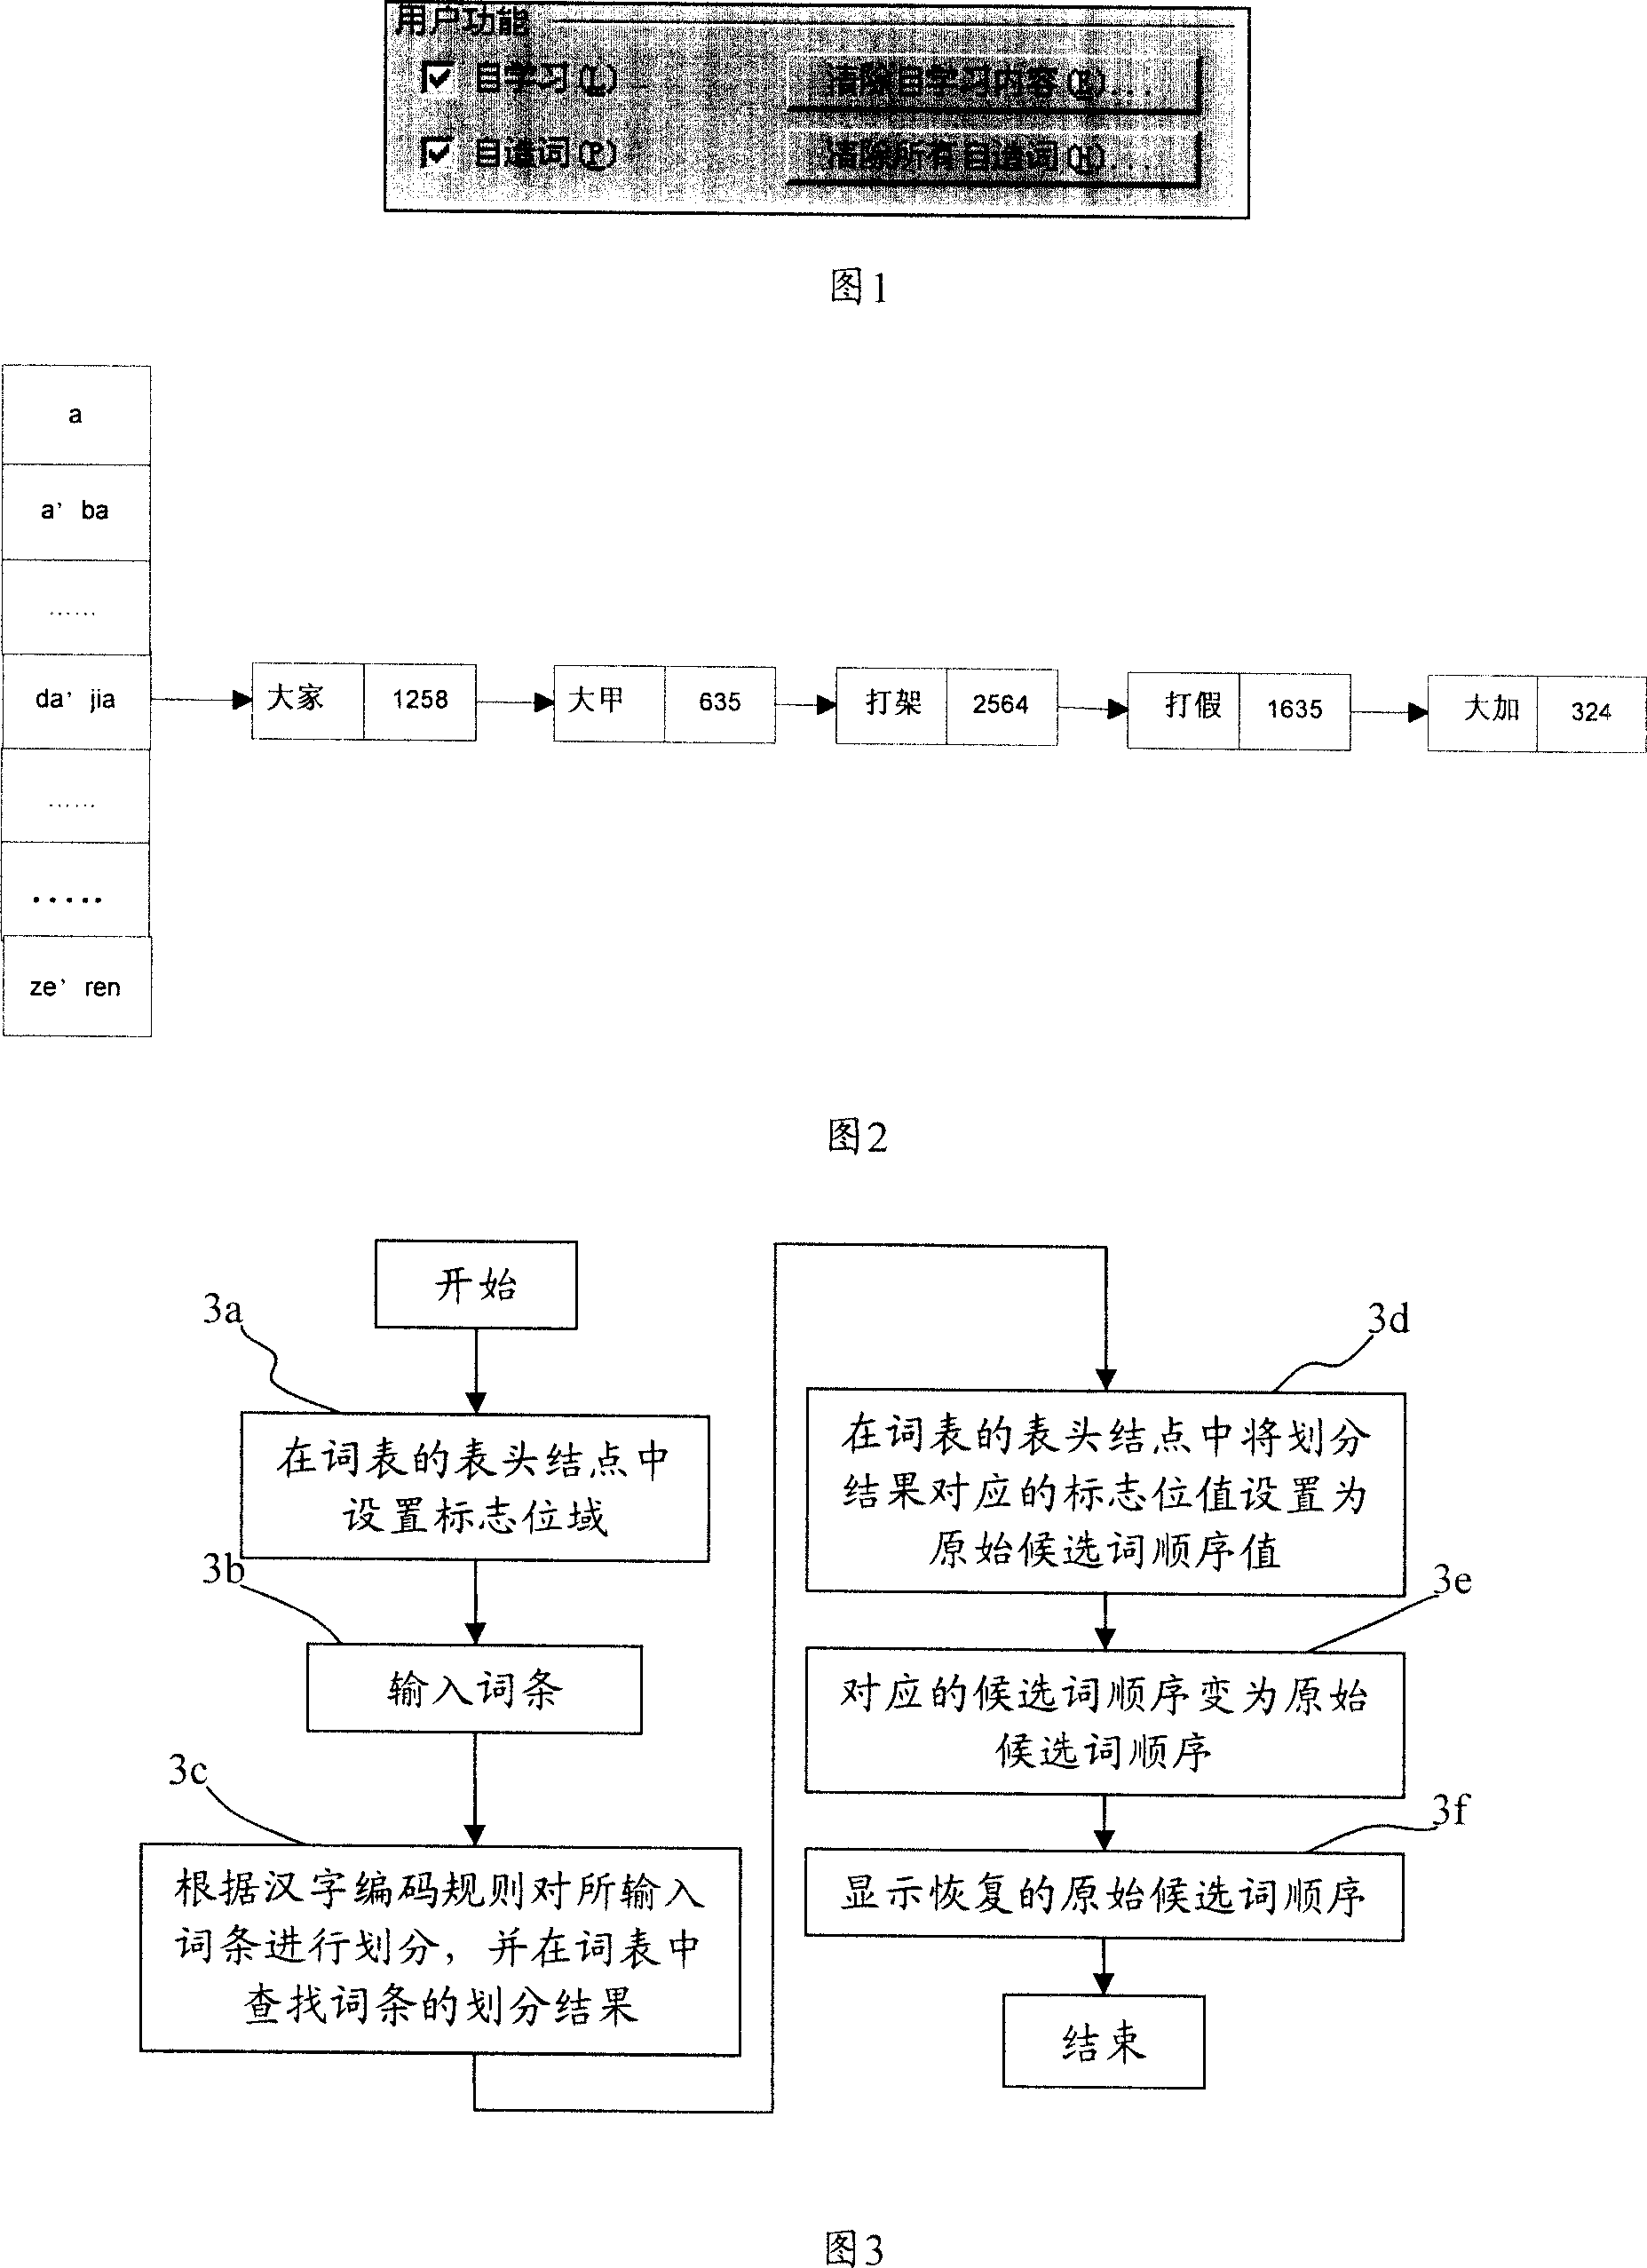 Method and system for restoring candidat word order for Chinese input method